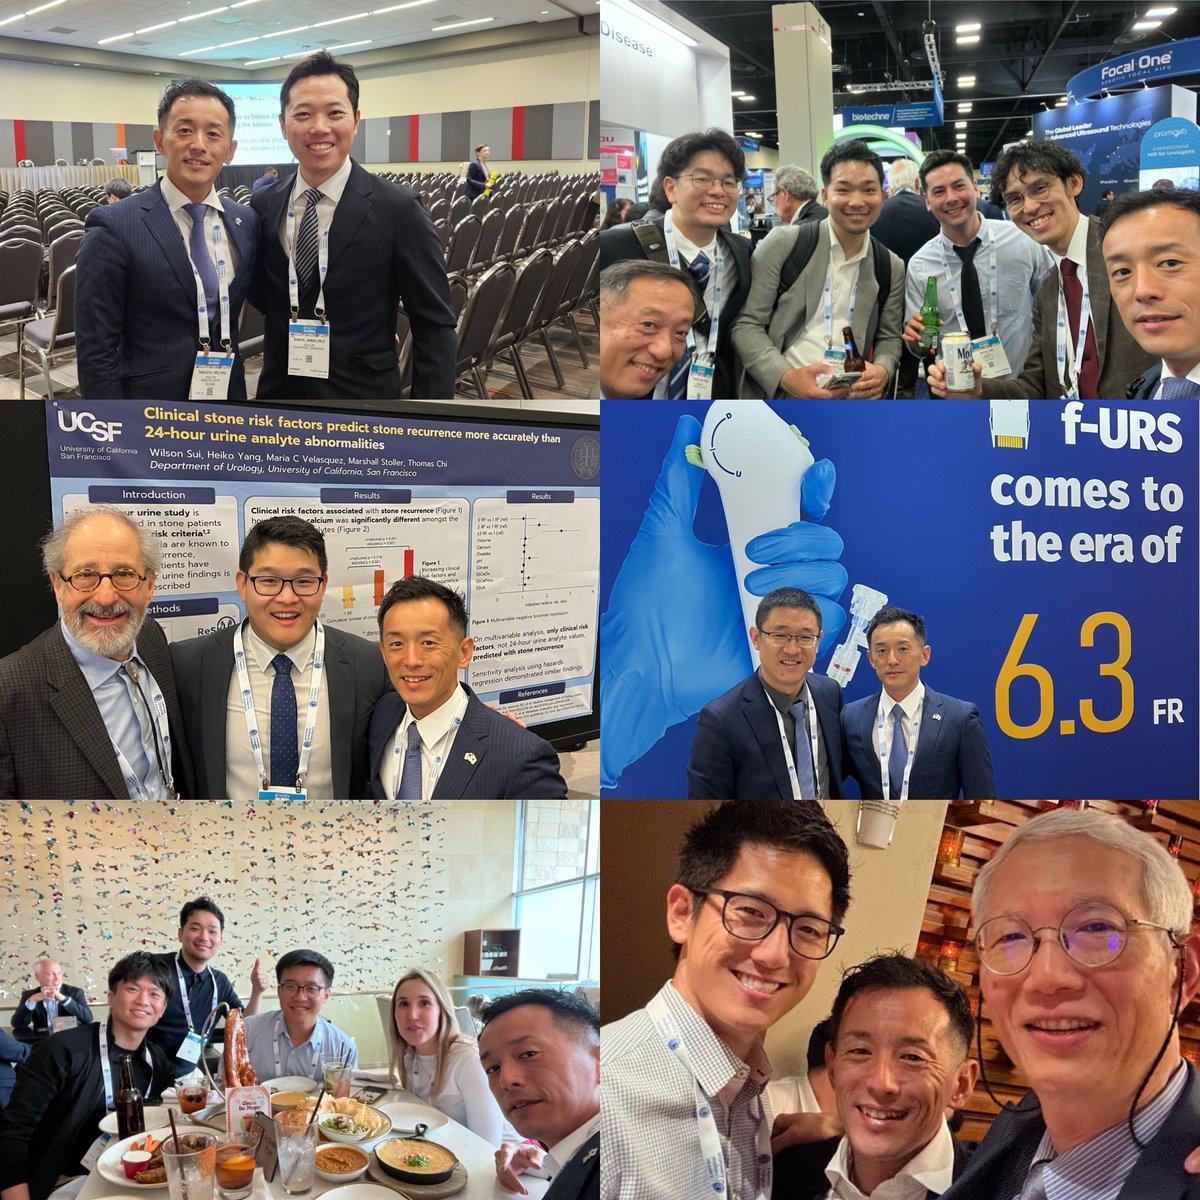 Wrapped up my #AUA24 It’s been an incredibly educational and enjoyable week! Thank you again, colleagues, mentors @UCSFUrology, and friends @AmerUrological See you soon at #WCET24 @Endo_Society #UroSoMe #endourology